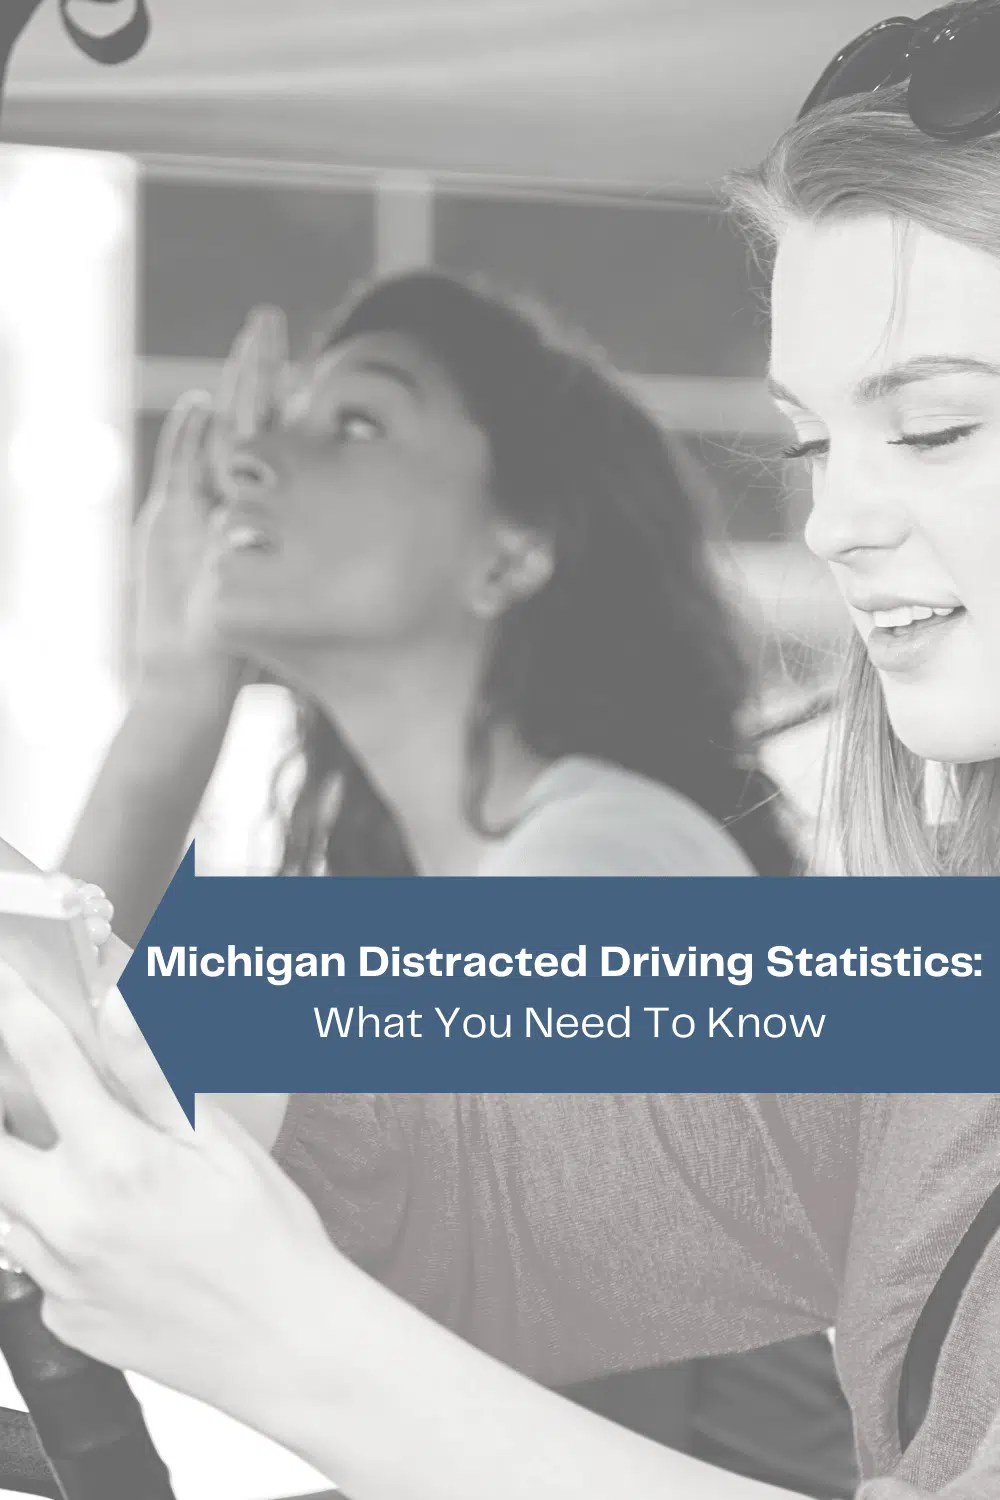 Distracted Driving Statistics Nationally and For Michigan: What You Need To Know